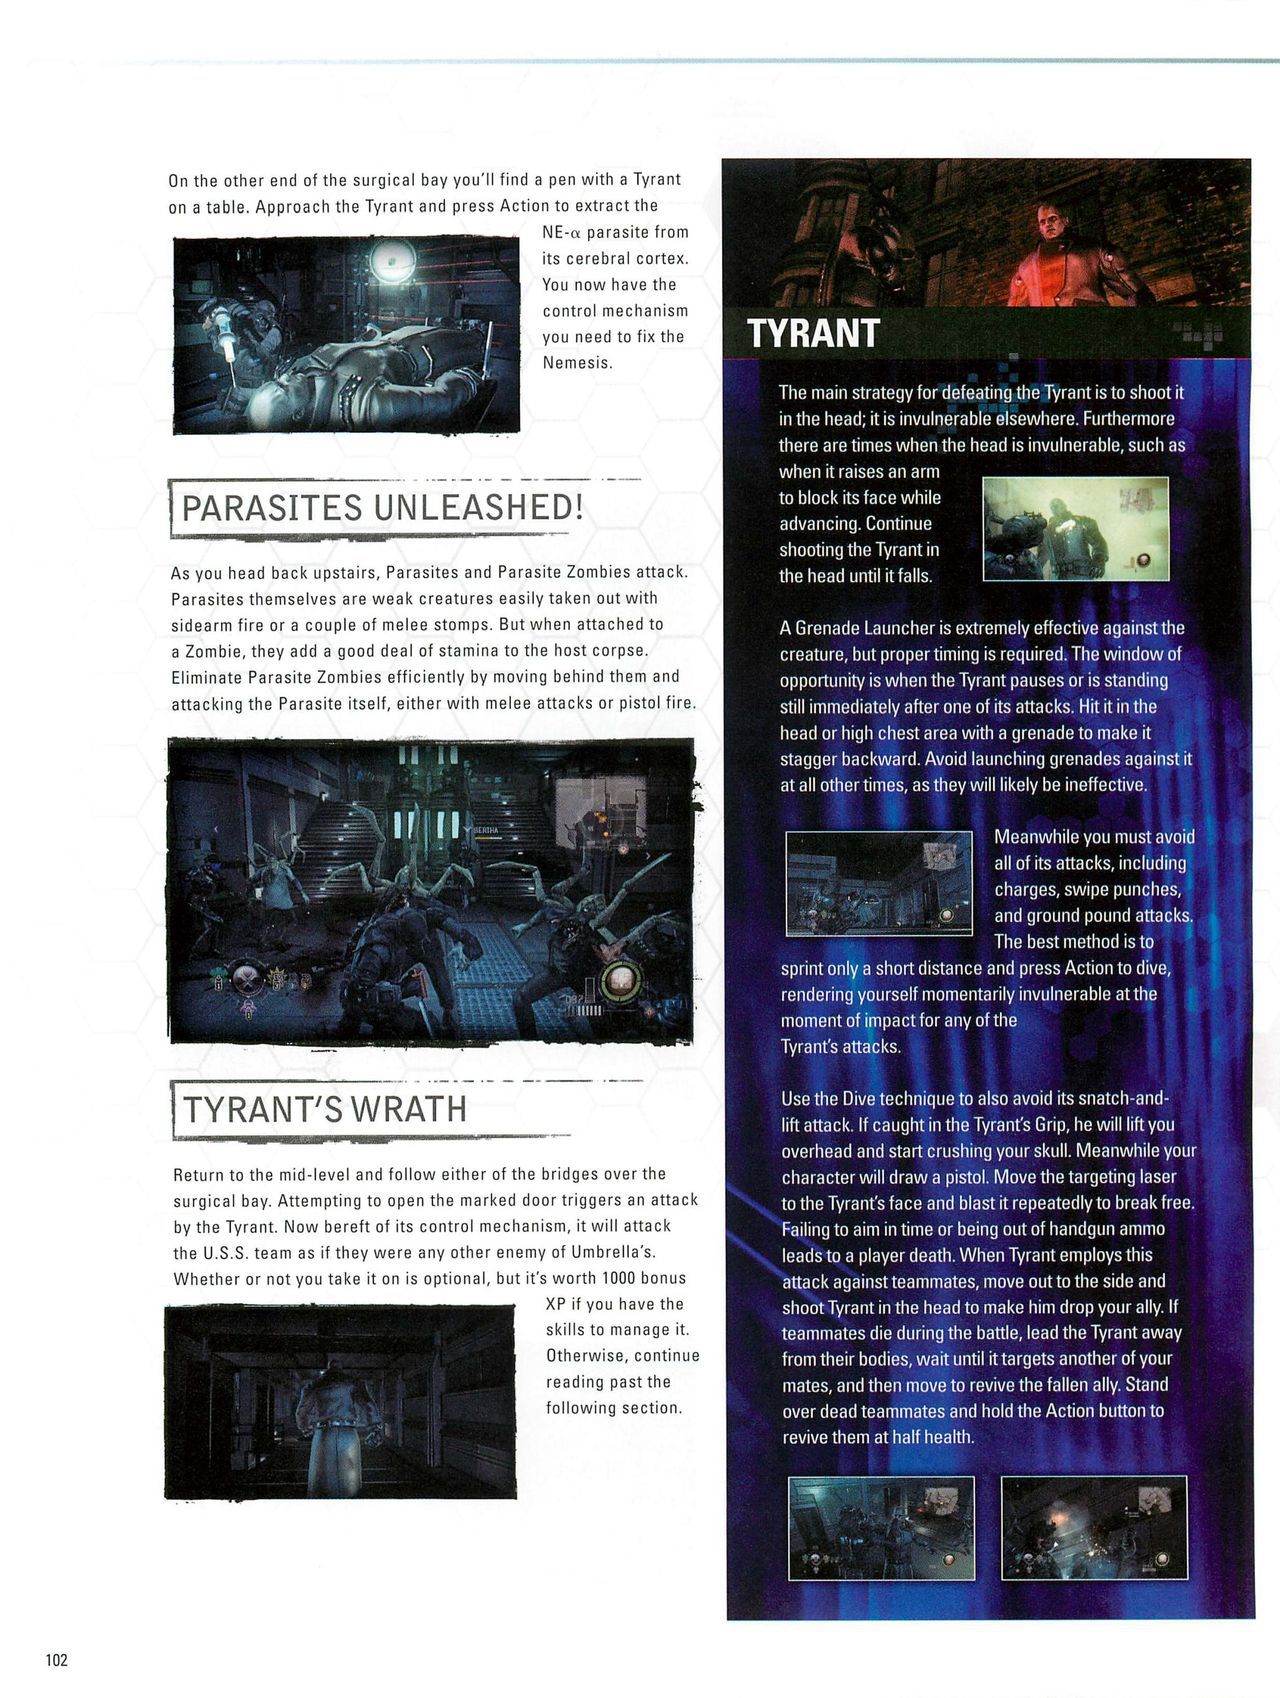 Resident Evil: Operation Raccoon City Official Strategy Guide (watermarked) 104